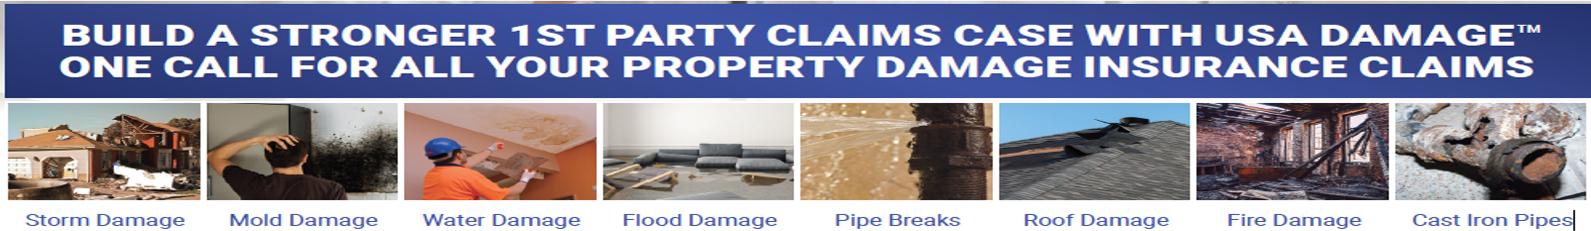 BUILD A STRONGER FIRST-PARTY CLAIMS CASE WITH USA DAMAGE™ ONE CALL FOR ALL YOUR PROPERTY DAMAGE INSURANCE CLAIMS